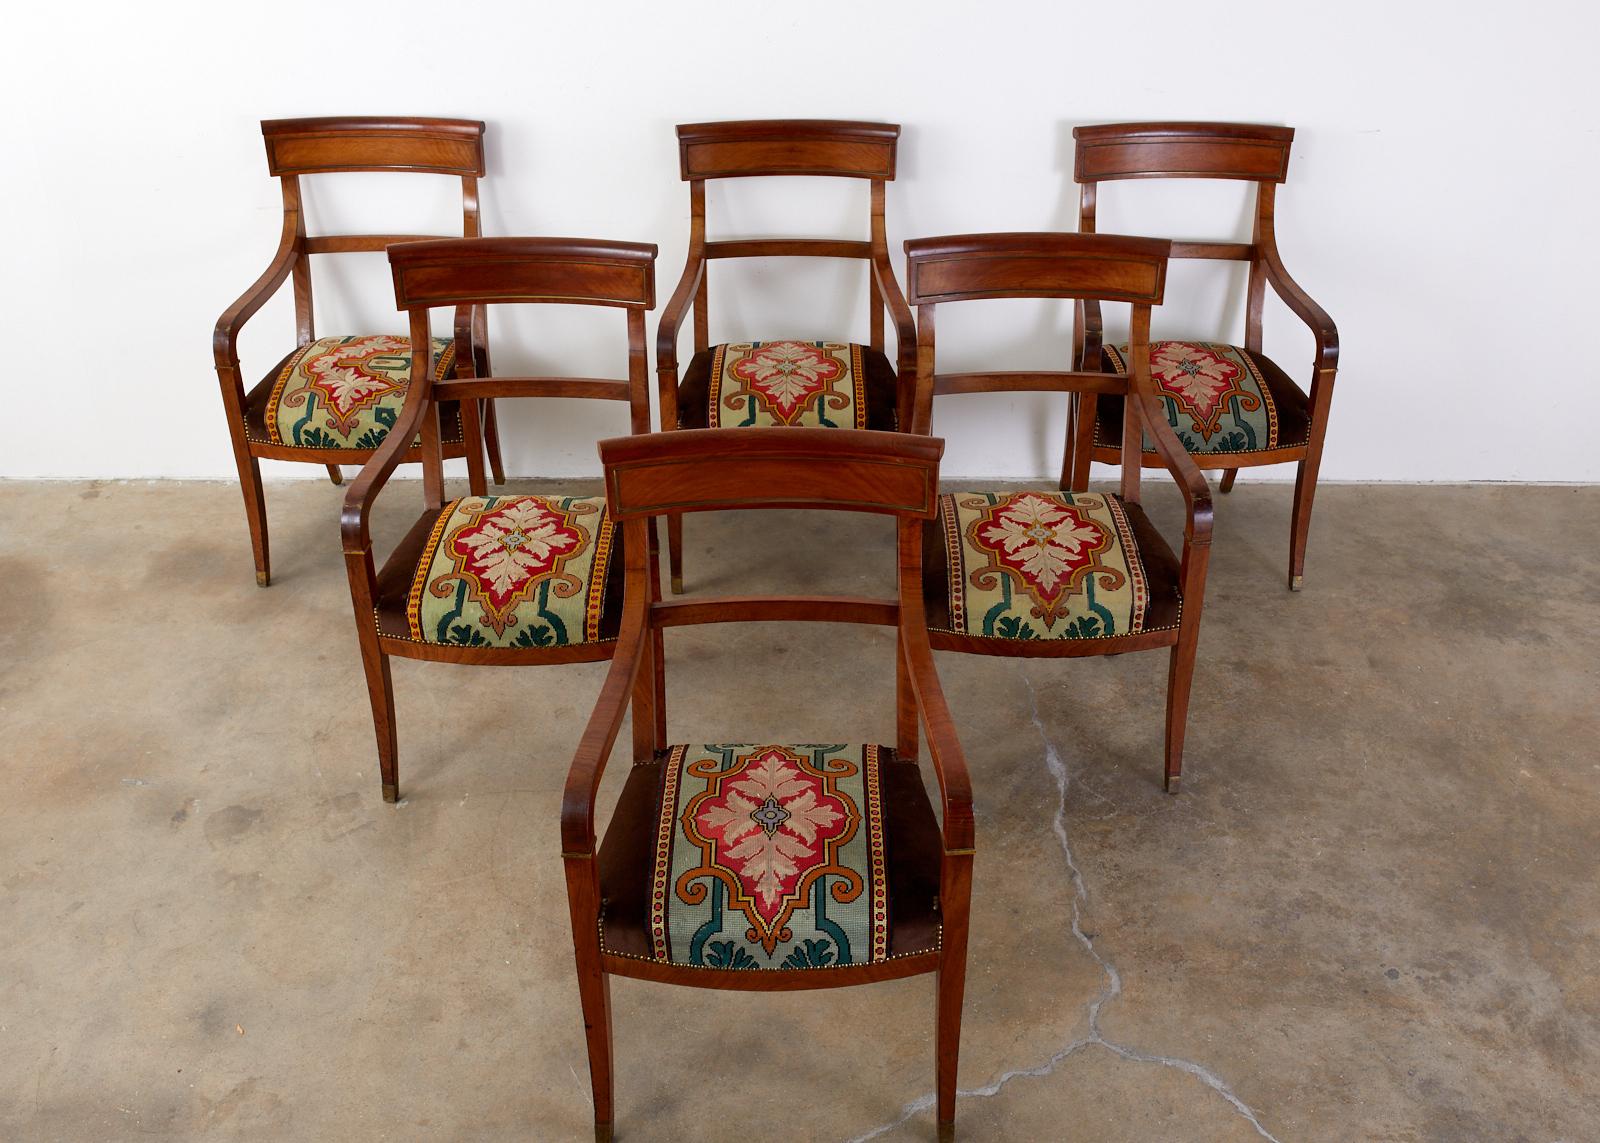 Distinctive 19th century set of six English Regency bronze mounted walnut dining armchairs or library armchairs. The chairs feature an Arts & Crafts era needlepoint decorated seat with brown velvet borders and brass tack nailhead trim. Substantial